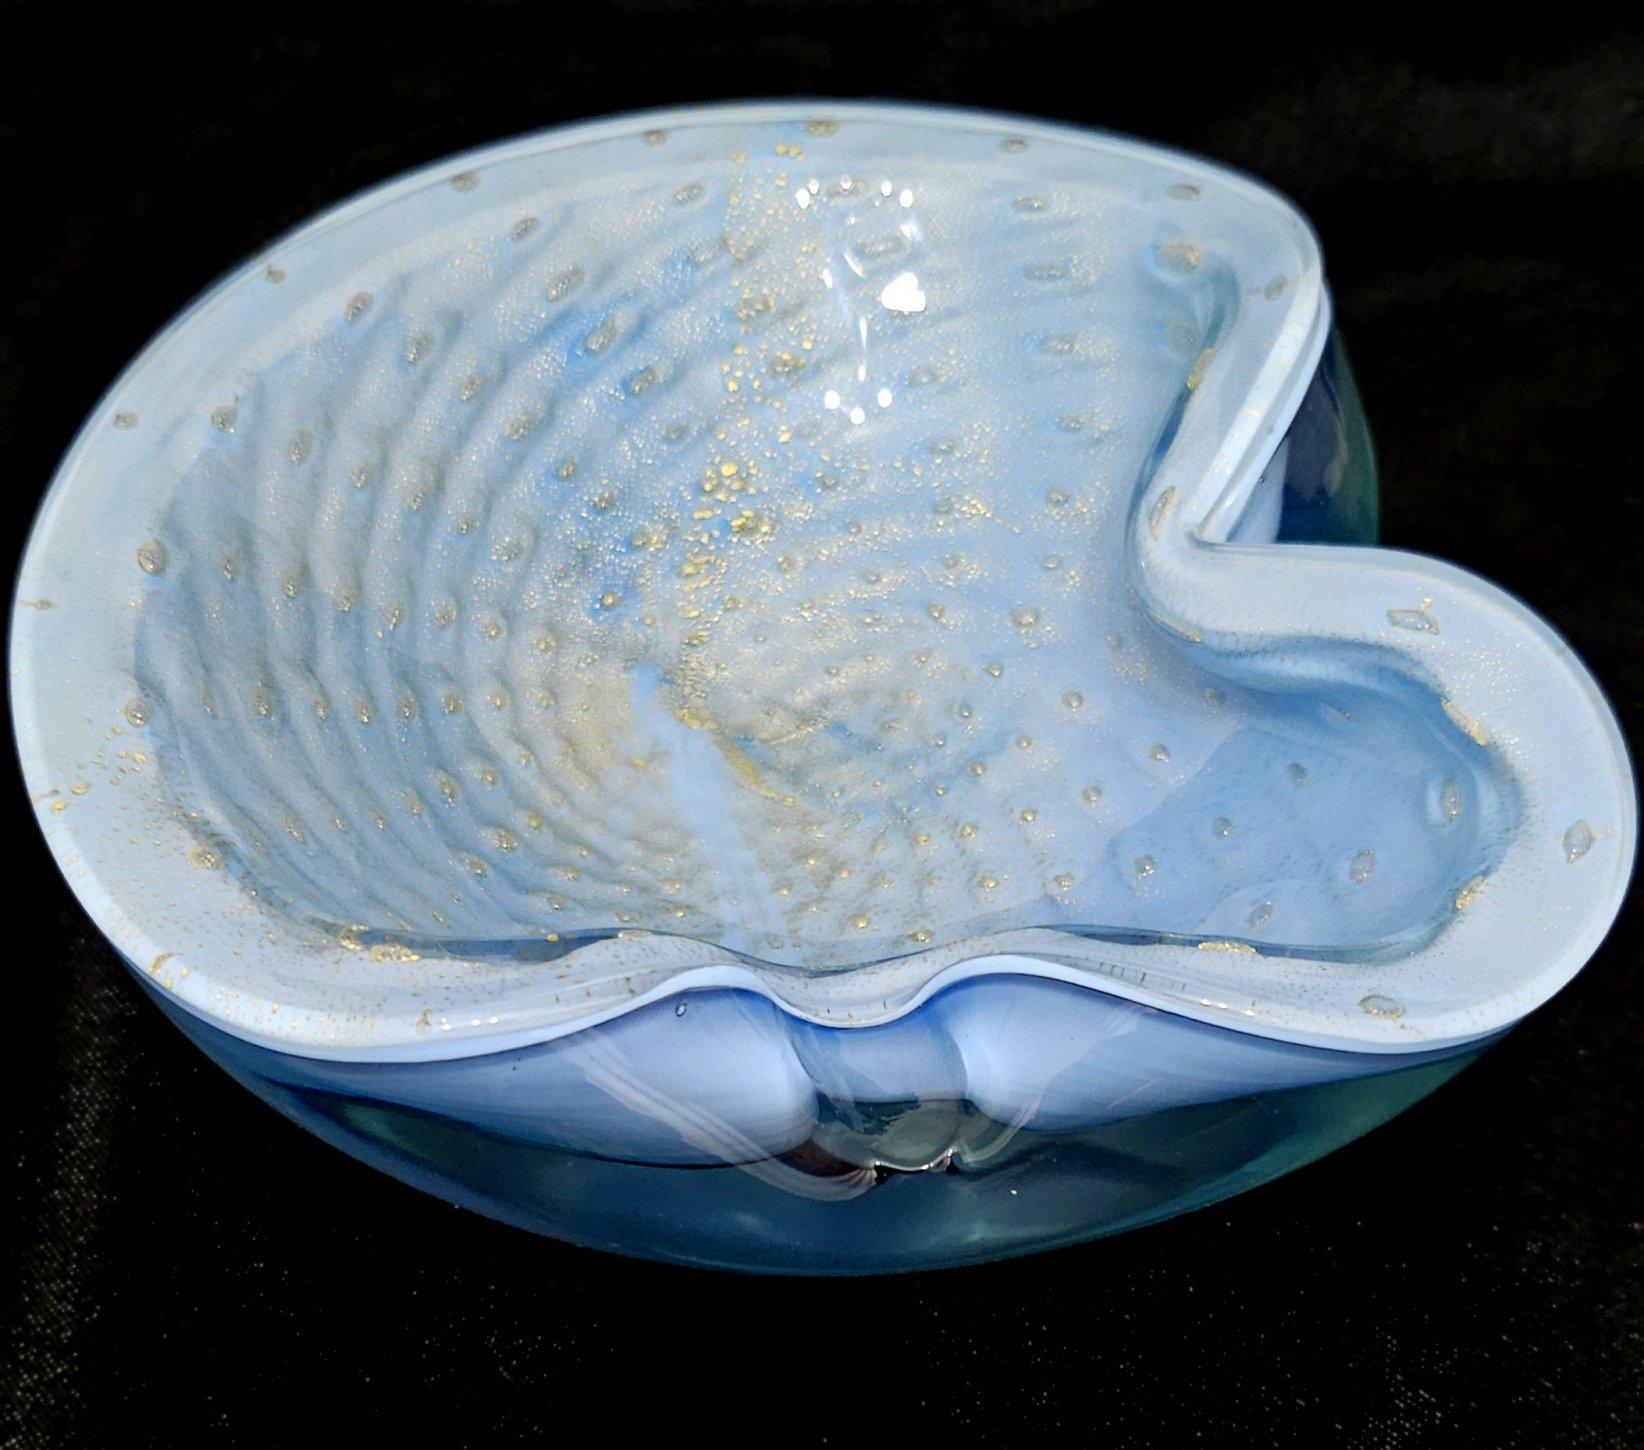 Vintage Murano Glass Bullicante Bowl/Vide Poche with Gold Polveri
Very much like Barbini's work but could also be by AVeM or other Murano artist.
Measures about 6 x 2 inches.
No chips or cracks. Nice vintage condition.

Measurements are approximate